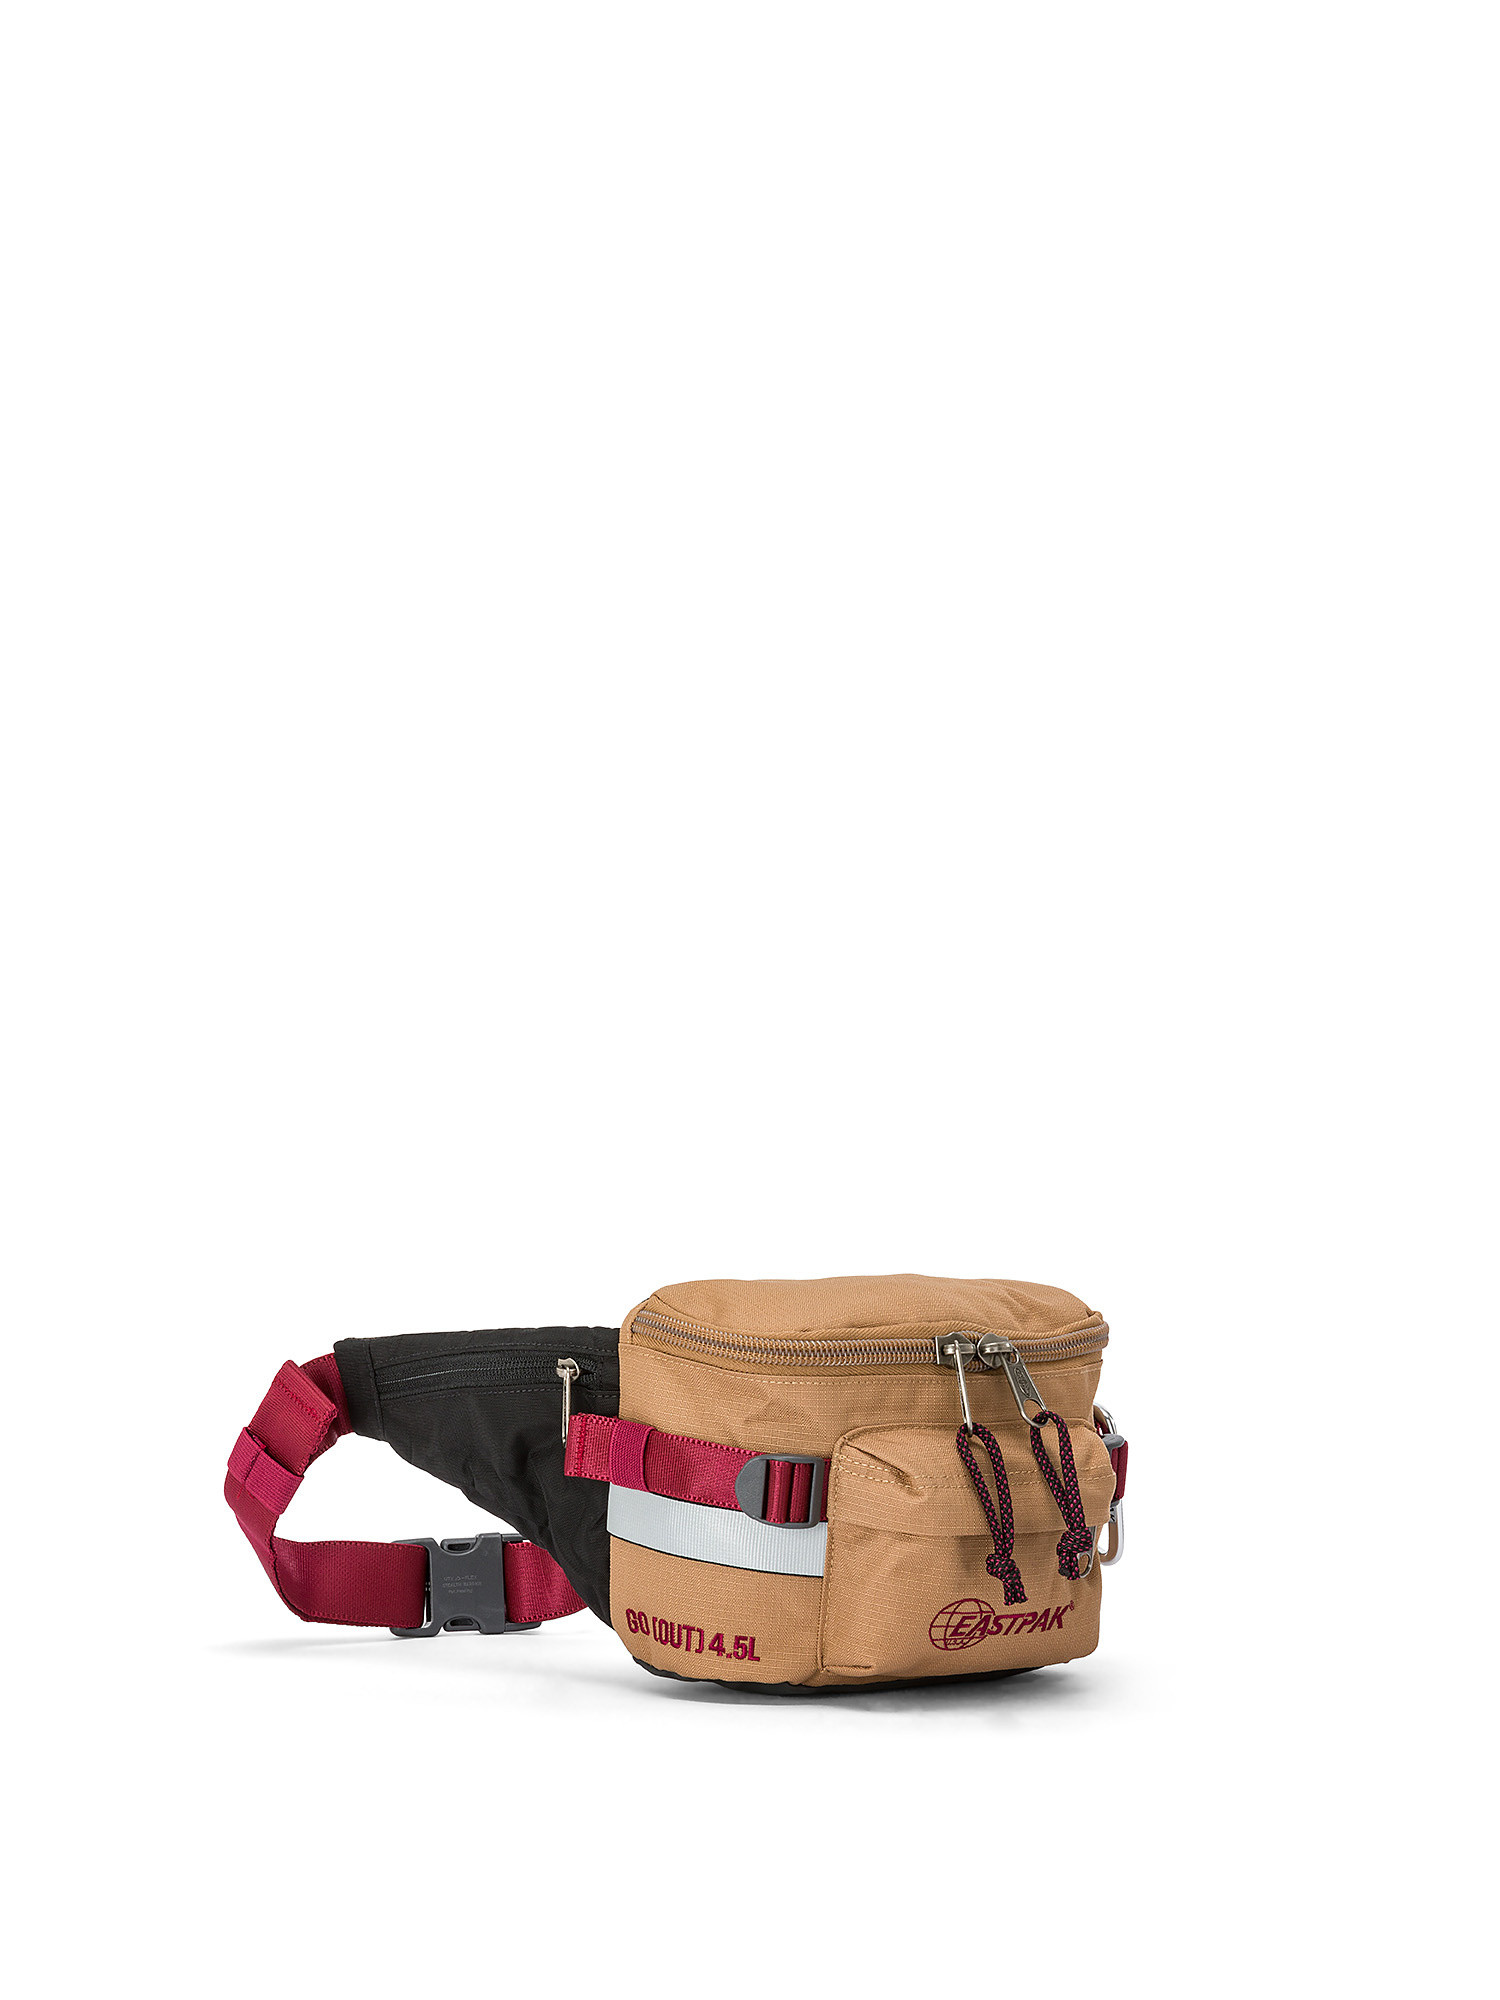 Eastpak - Marsupio Out Bumbag Out Brown, Marrone chiaro, large image number 1